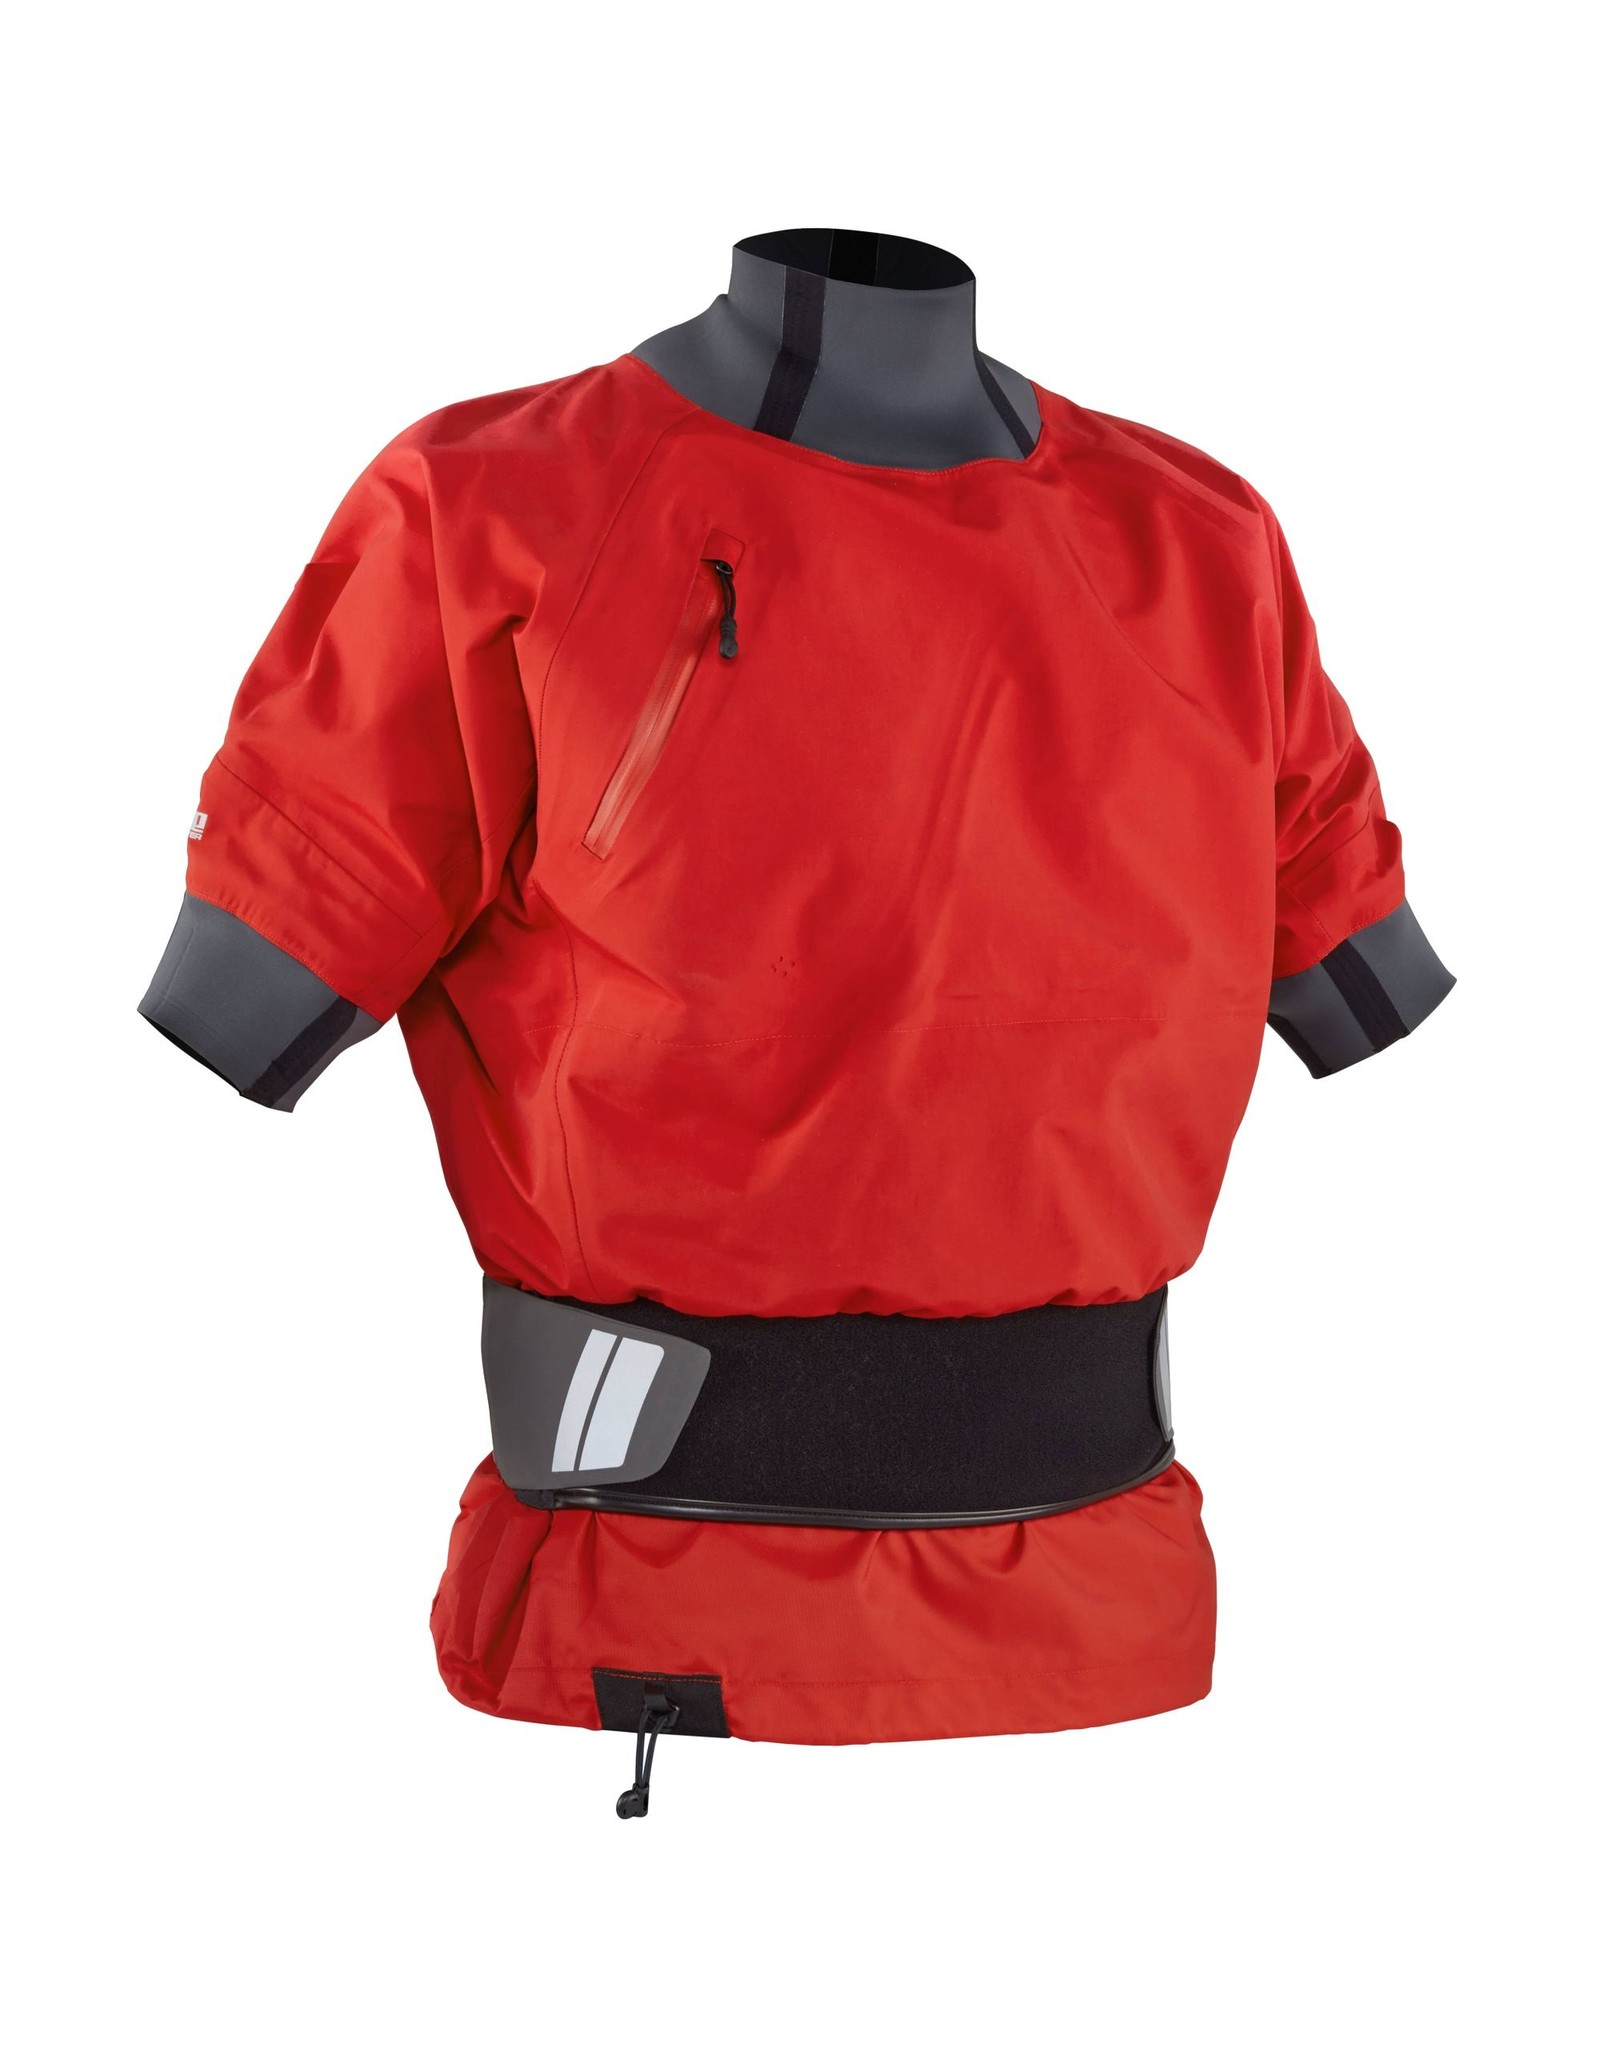 NRS NRS Stampede Shorty Play Paddling Jacket- Closeout